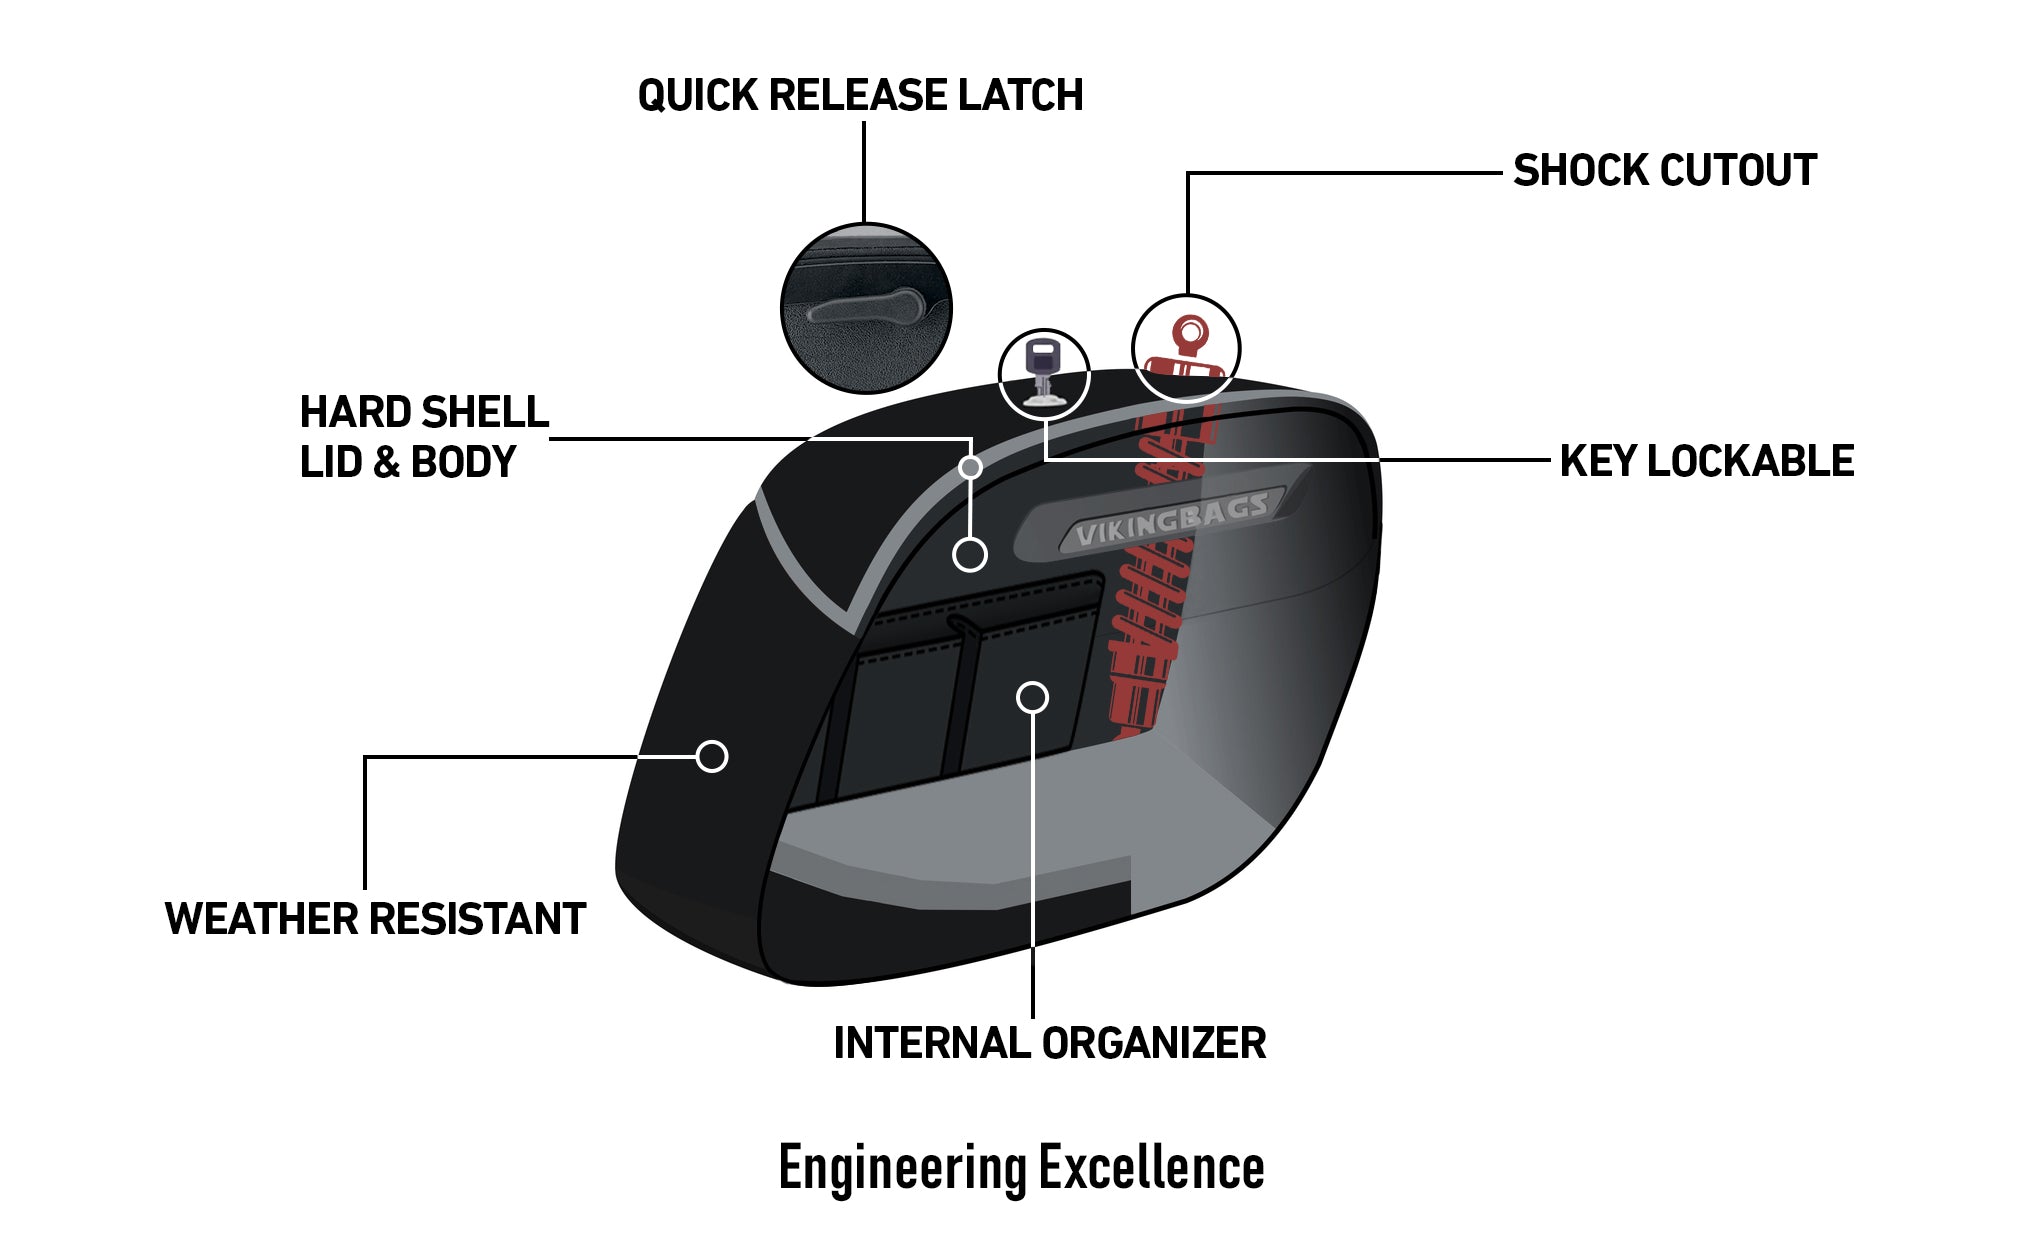 Viking Lamellar Raven Extra Large Shock Cutout Matte Hard Saddlebags For Harley Dyna Super Glide Fxd I Engineering Excellence with Bag on Bike @expand